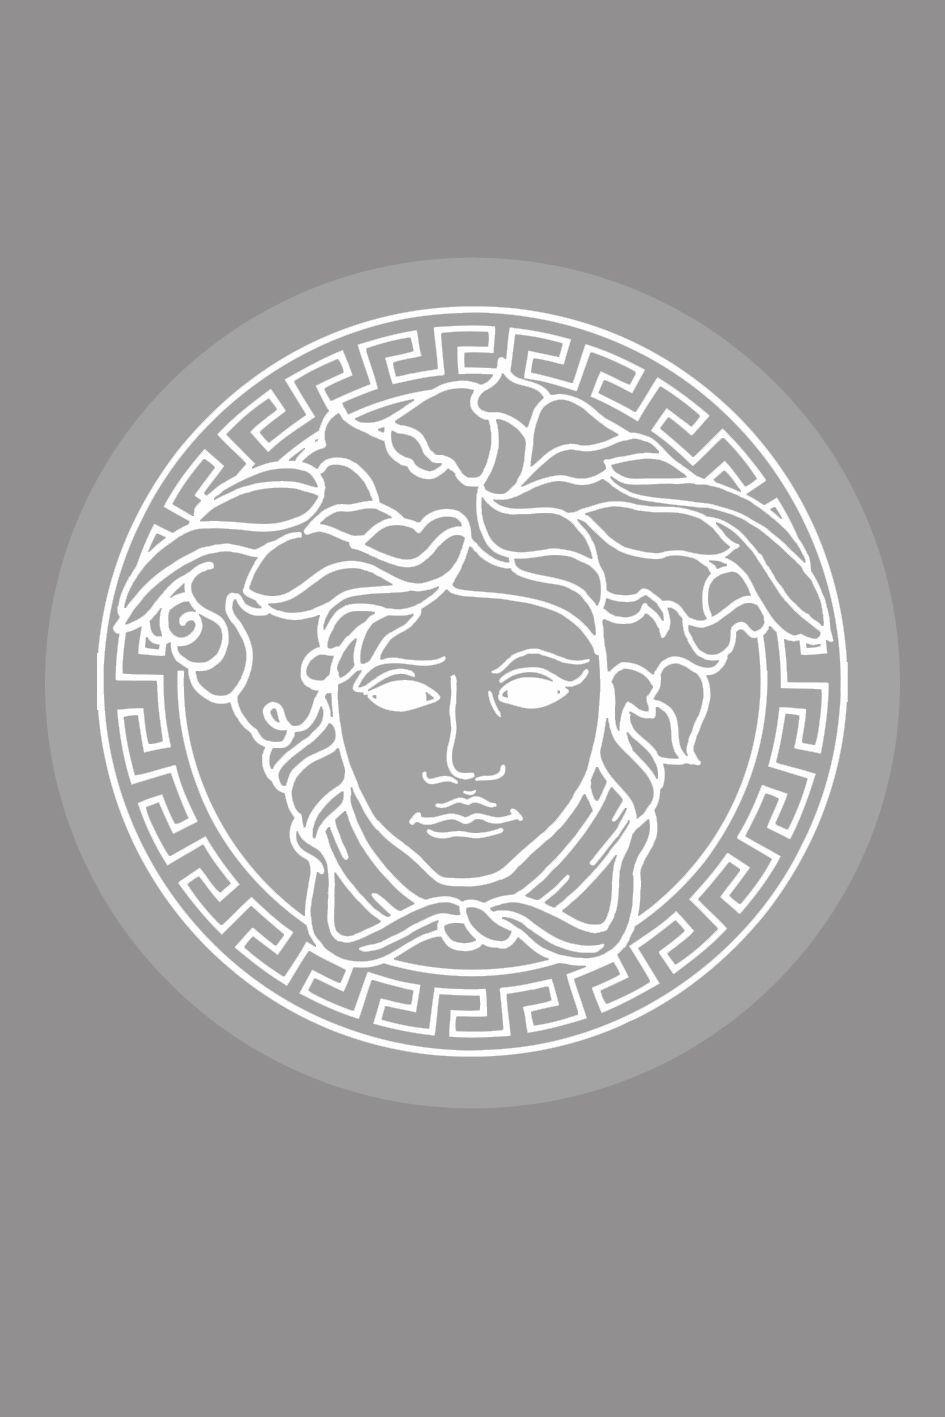 VERSACE by MOTEX on Dribbble